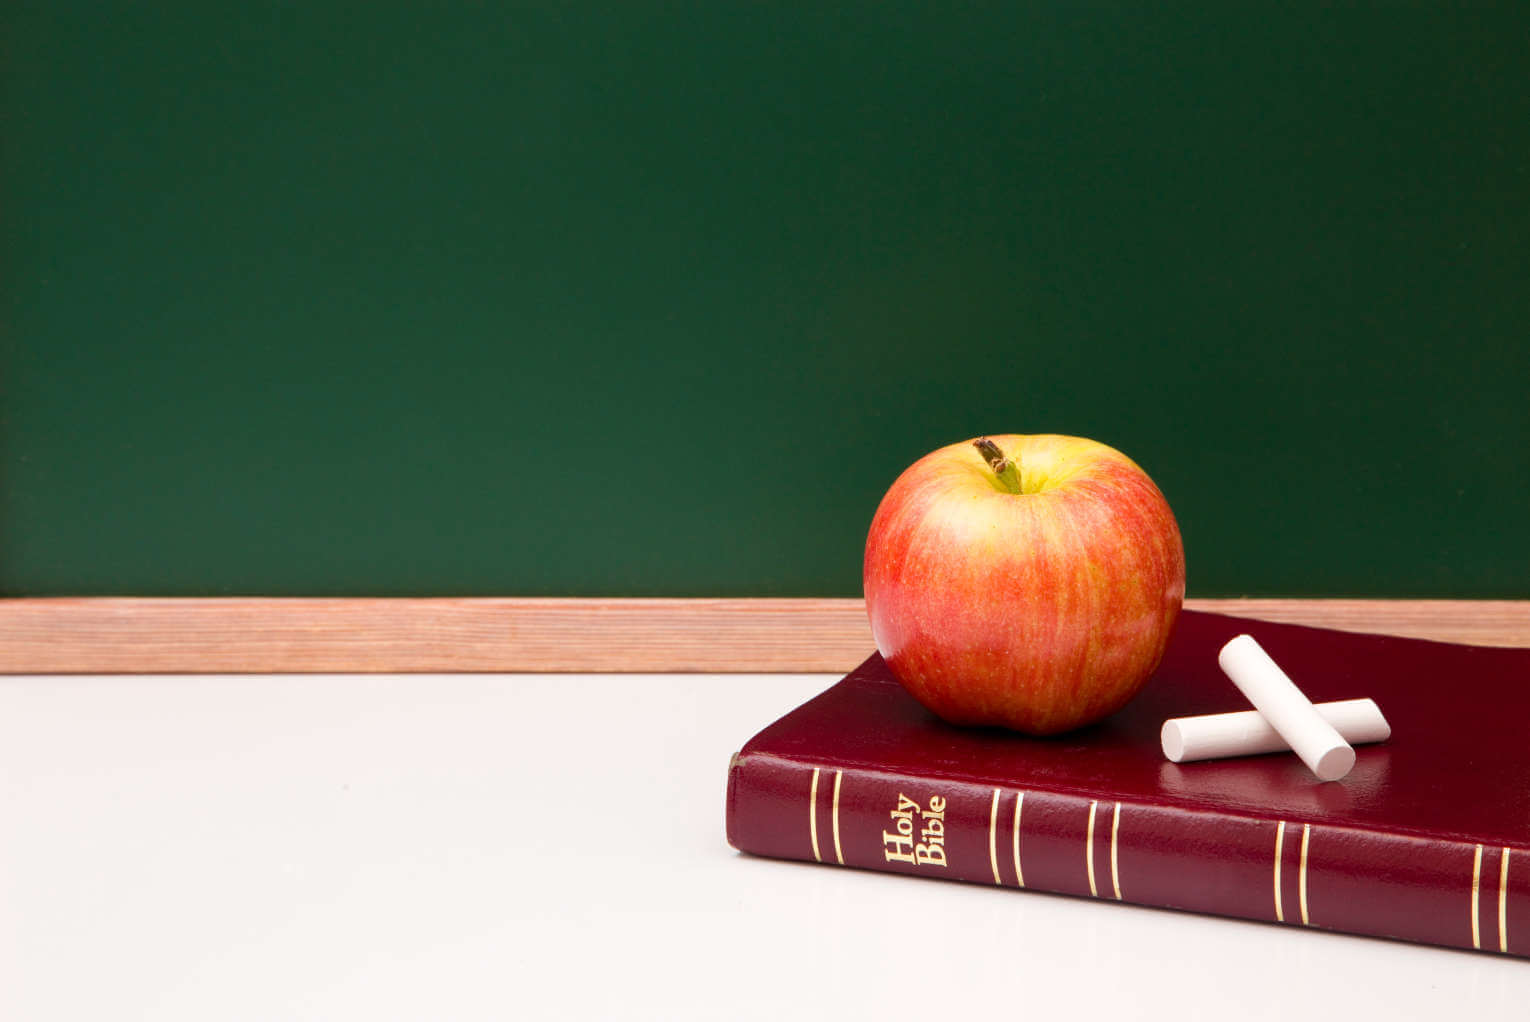 Bibles Required in Classrooms, Regarded as America’s Bedrock